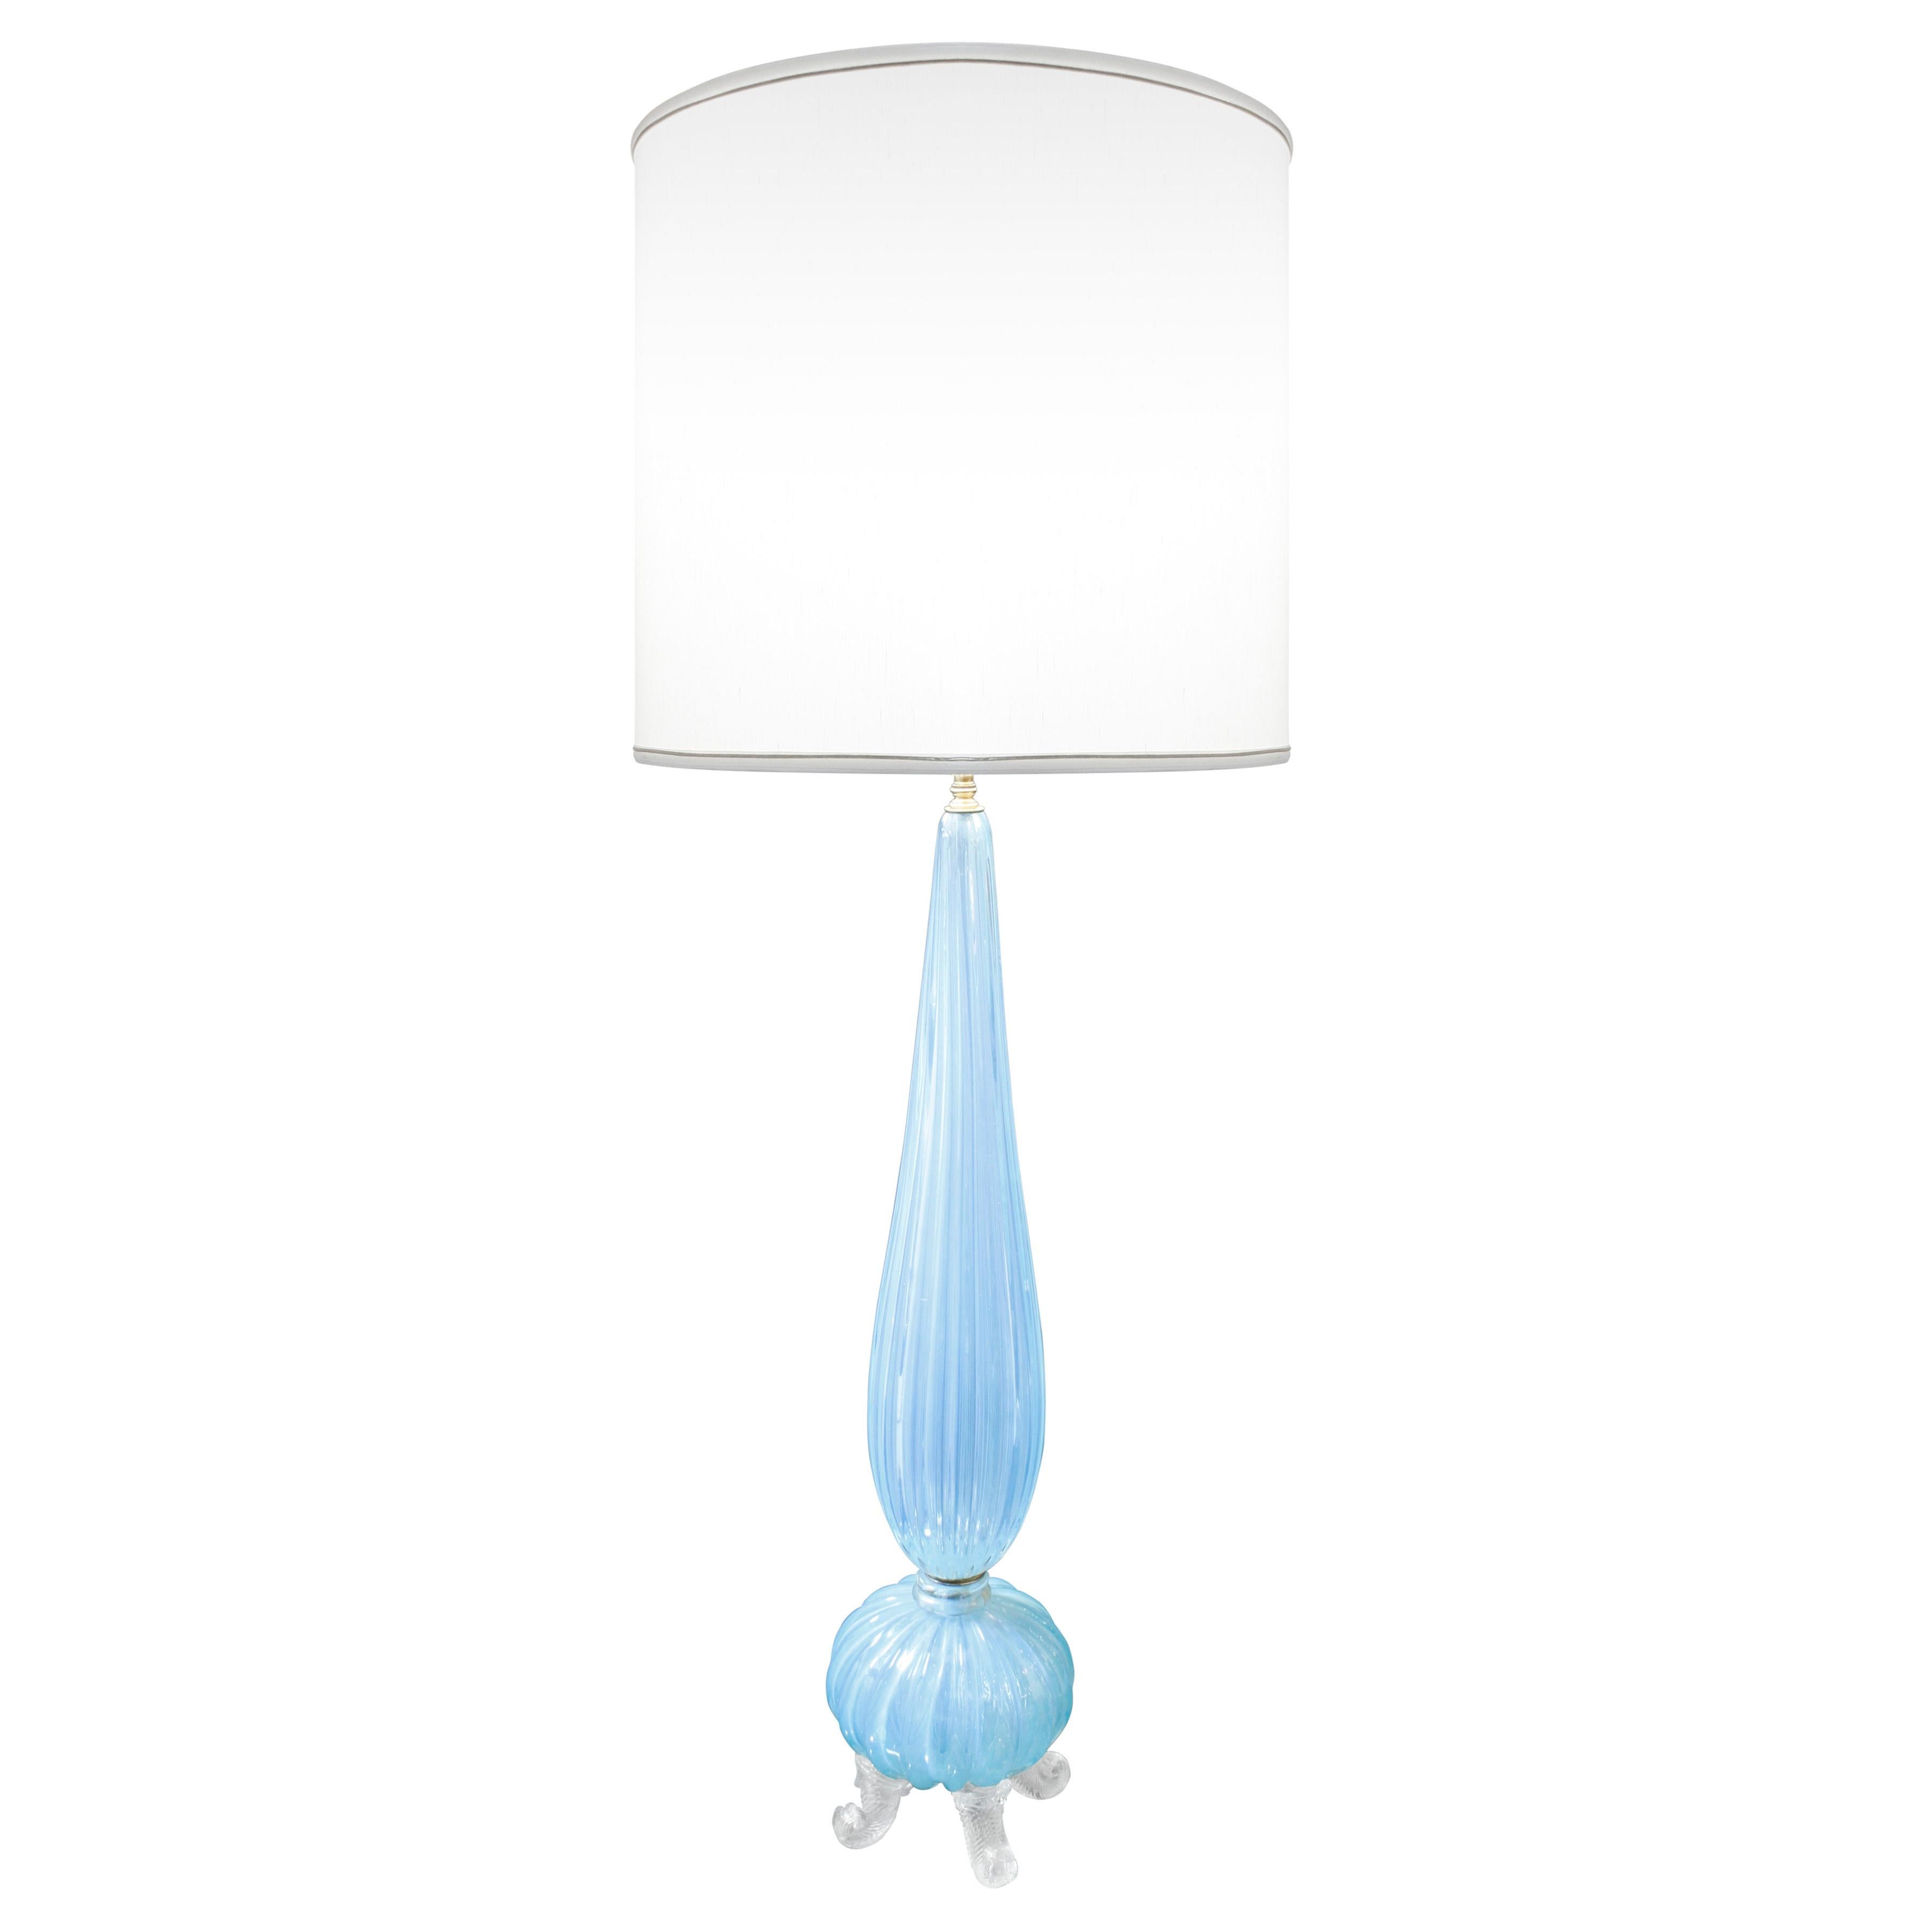 Monumental hand-blown glass table lamp, light blue with footed with channeled body, by Barovier & Toso, Murano Italy, 1950's. The scale of this hand-blown lamp is truly stunning.  As is the color.

Shade Diam: 20 inches
Shade H: 18 inches